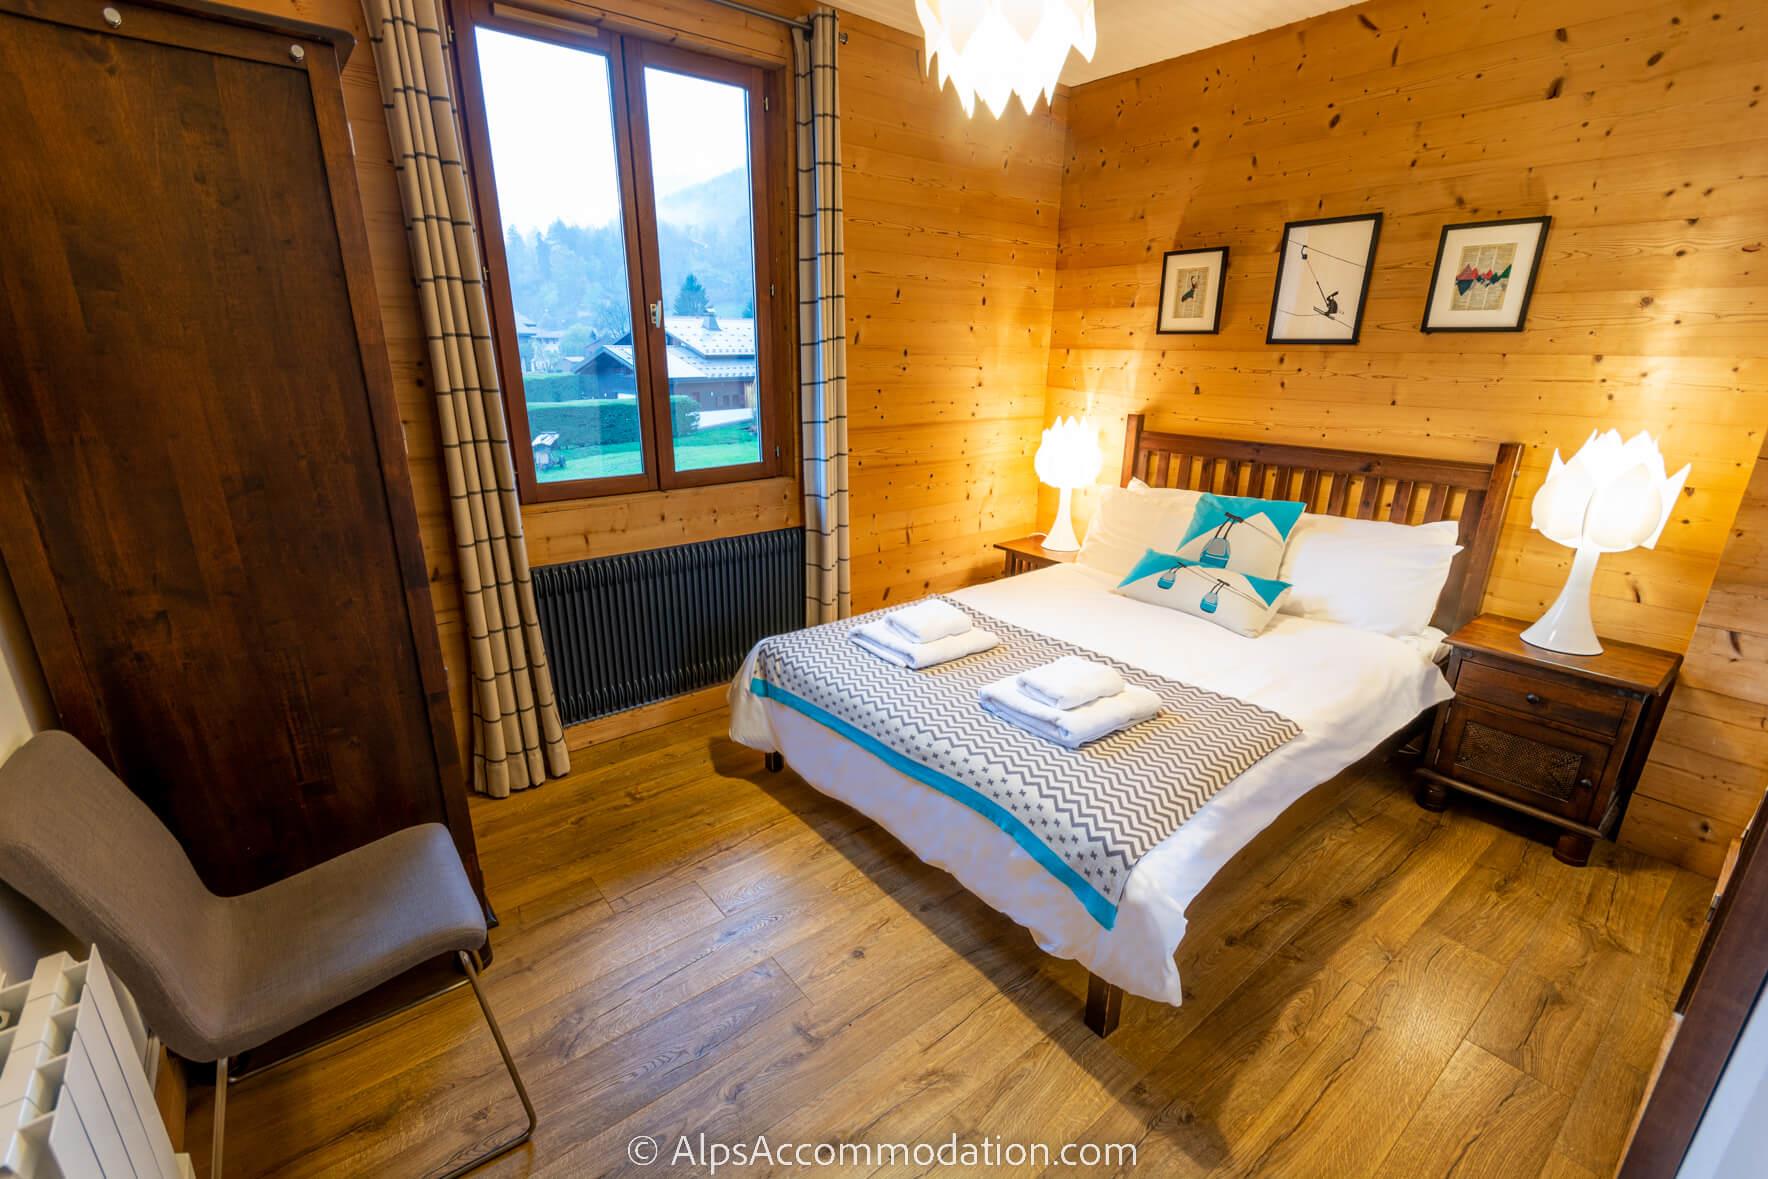 Chalet Moccand Samoëns - Double ensuite with beds made with crisp white linen and towels provided